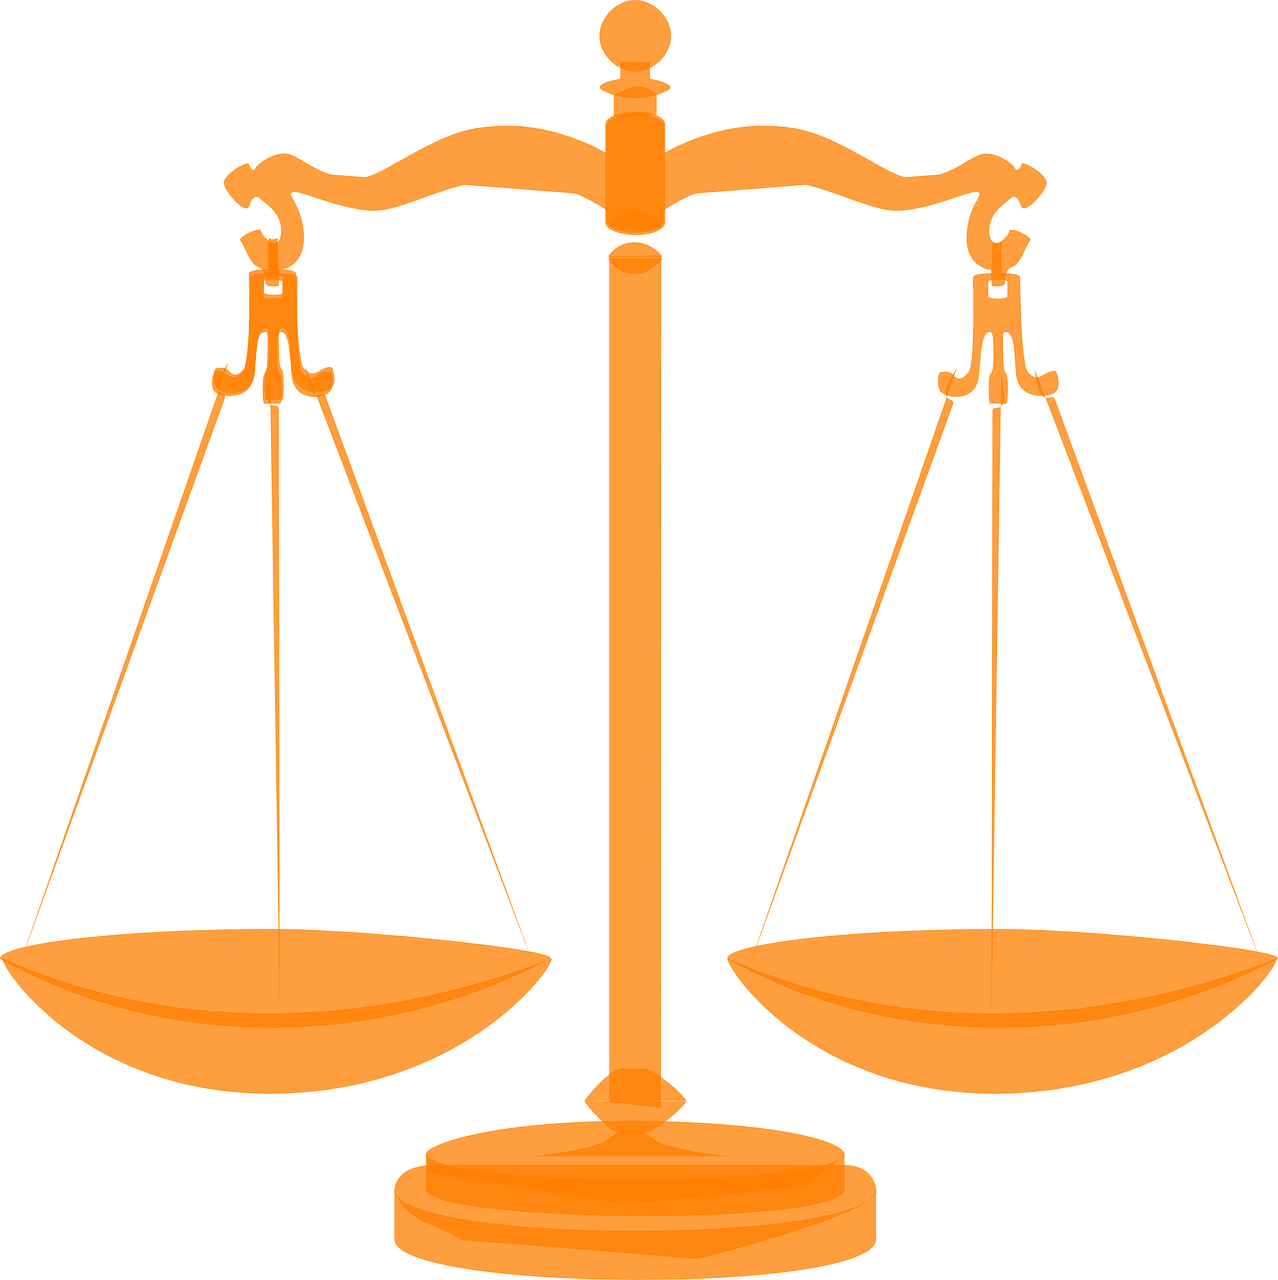 scales justice balanced free photo